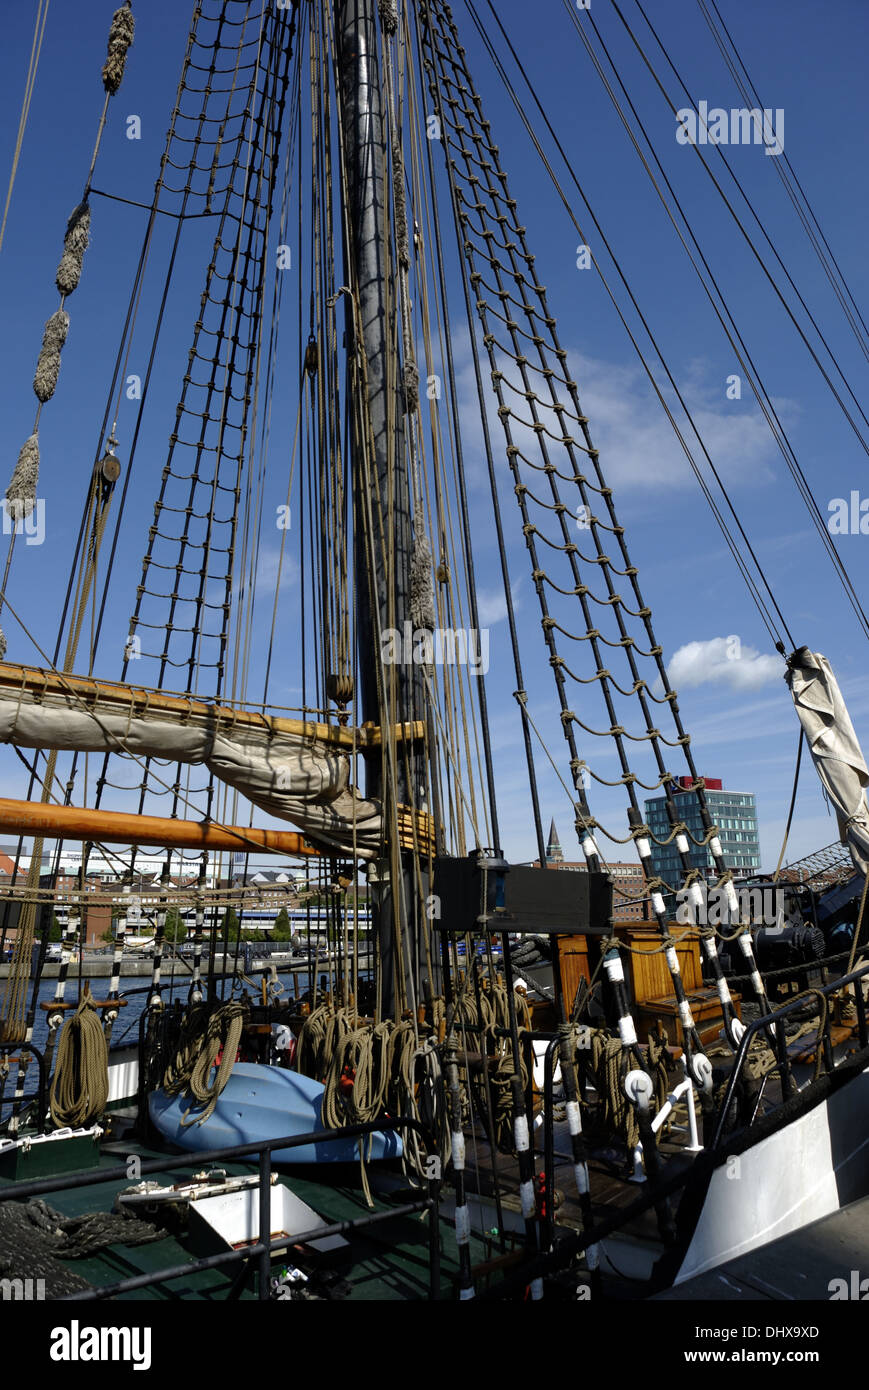 Rigging on a traditional sailing vessel Stock Photo